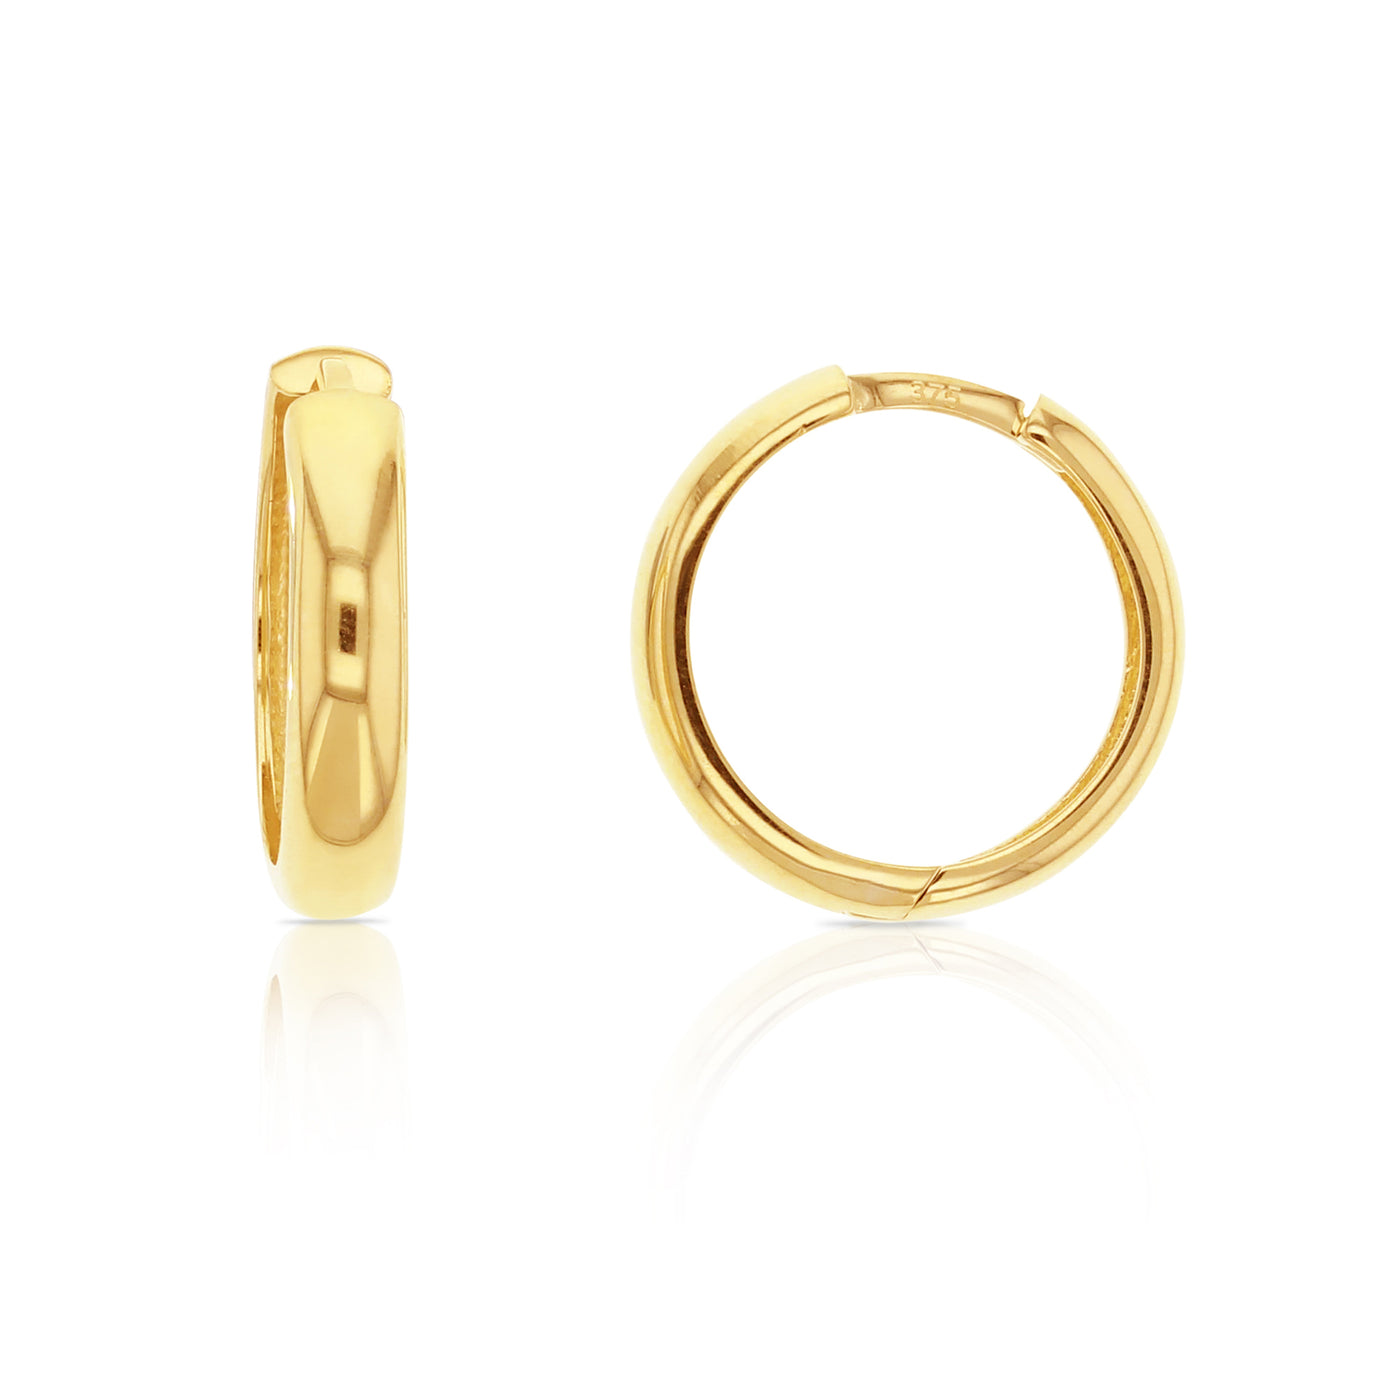 9ct yellow Gold domed huggie earrings.